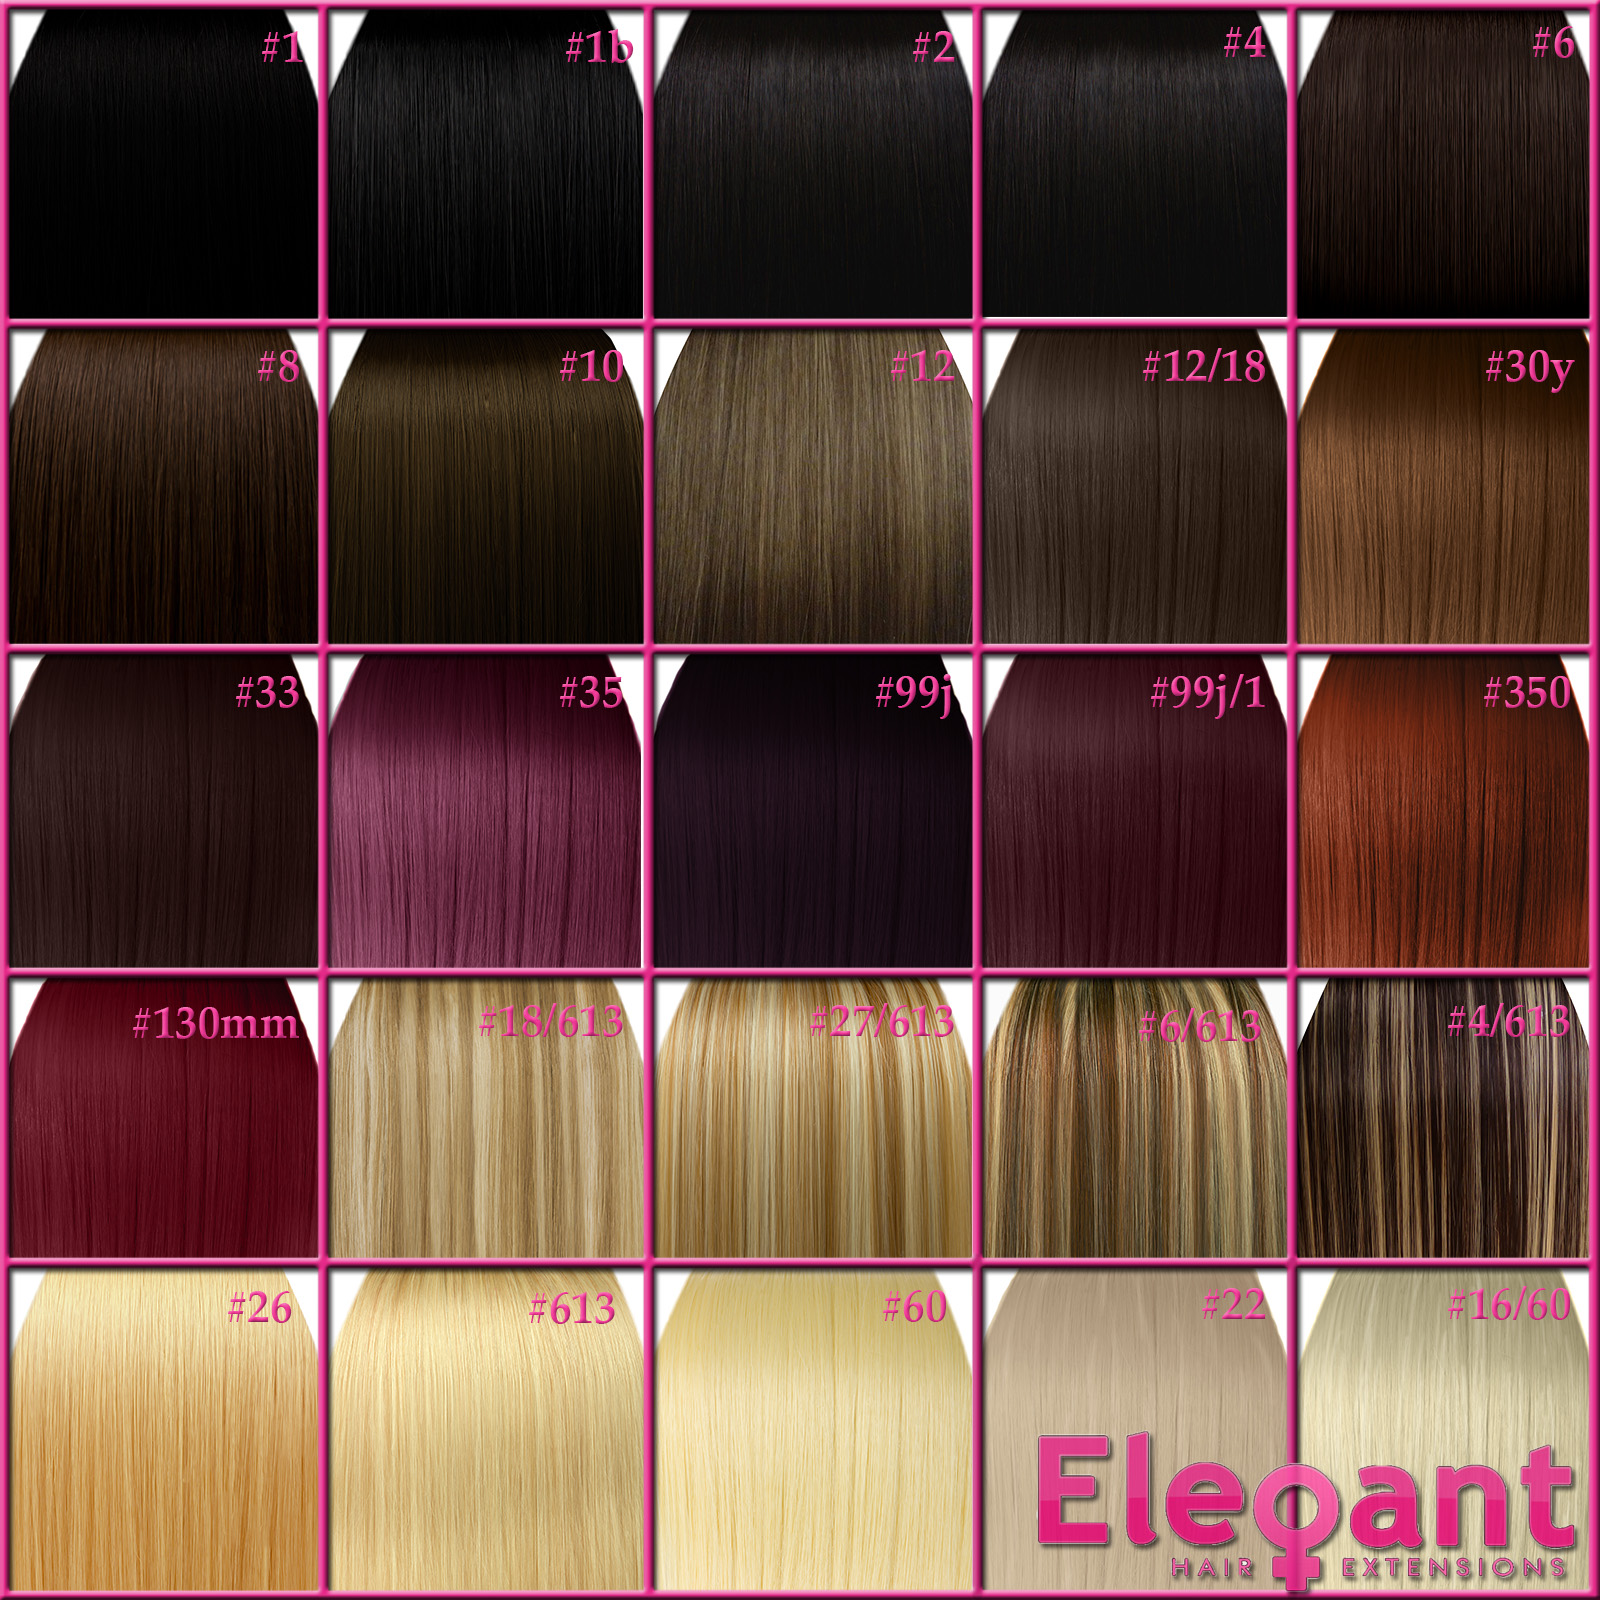 Red Burgundy Hair Color Chart